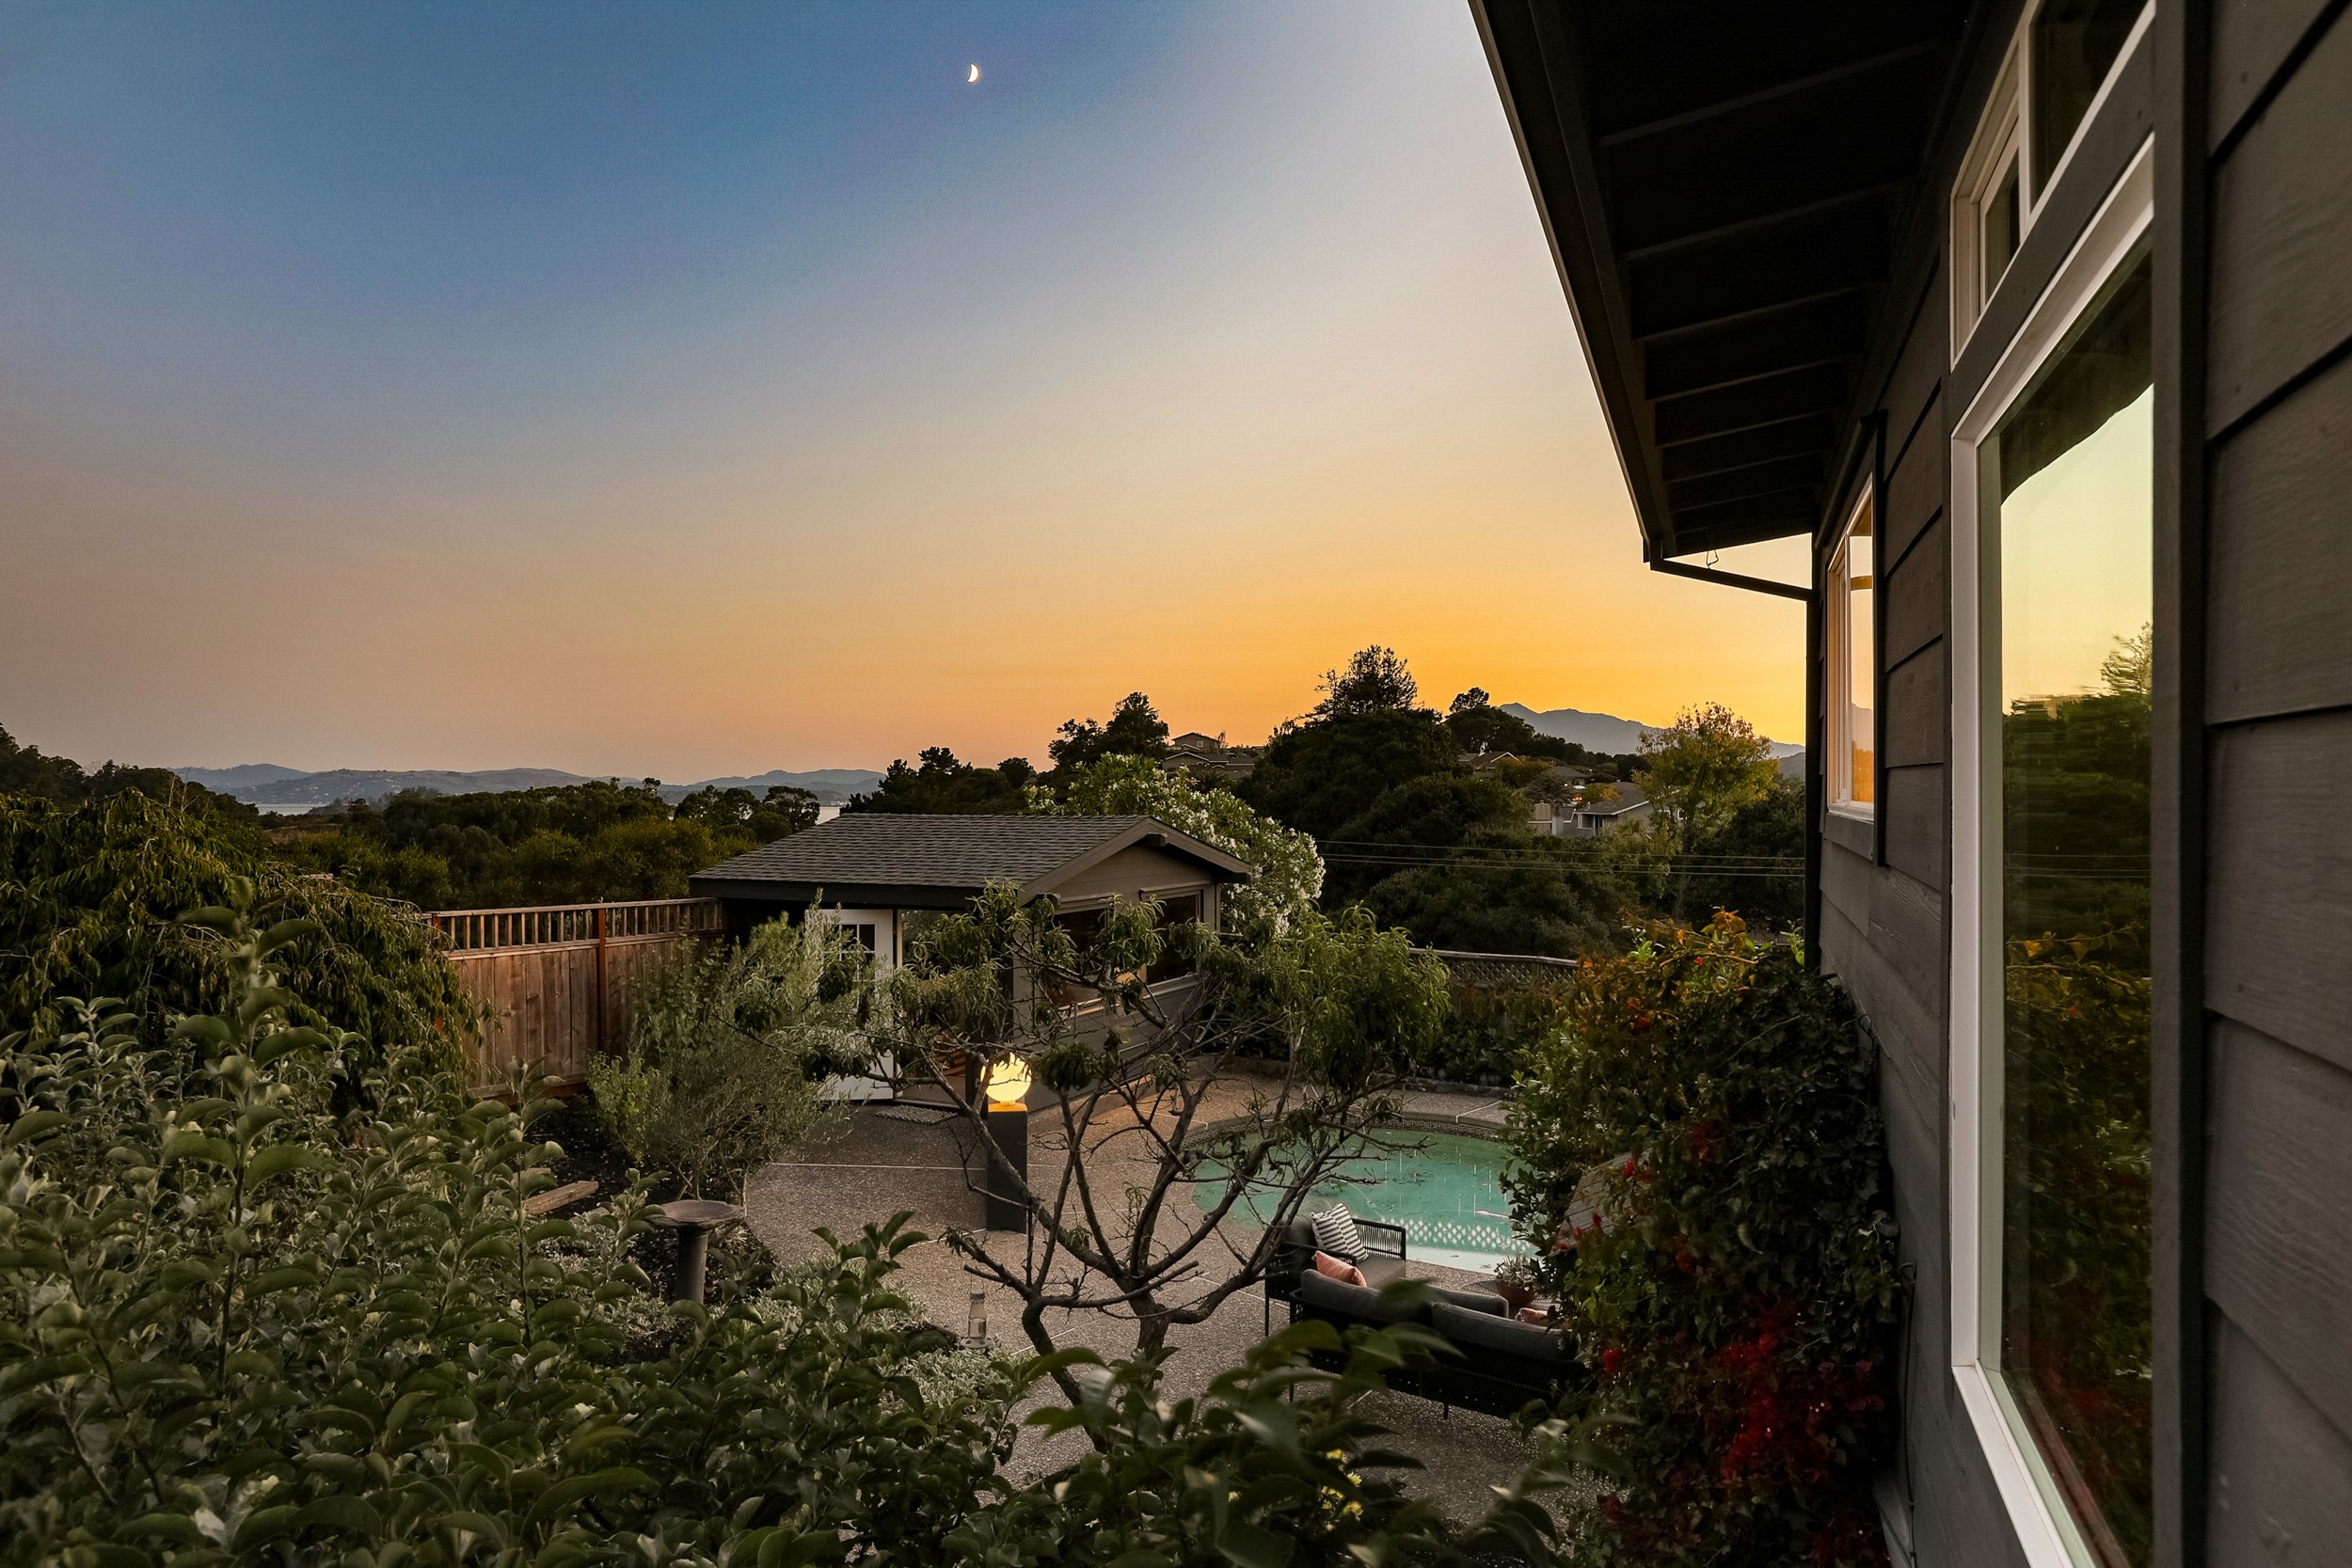 2 San Marino Court, San Rafael Real Estate For Sale _ Listed by Own Marin Best Realtors Allie Fornesi and Barr Haney-59.jpg